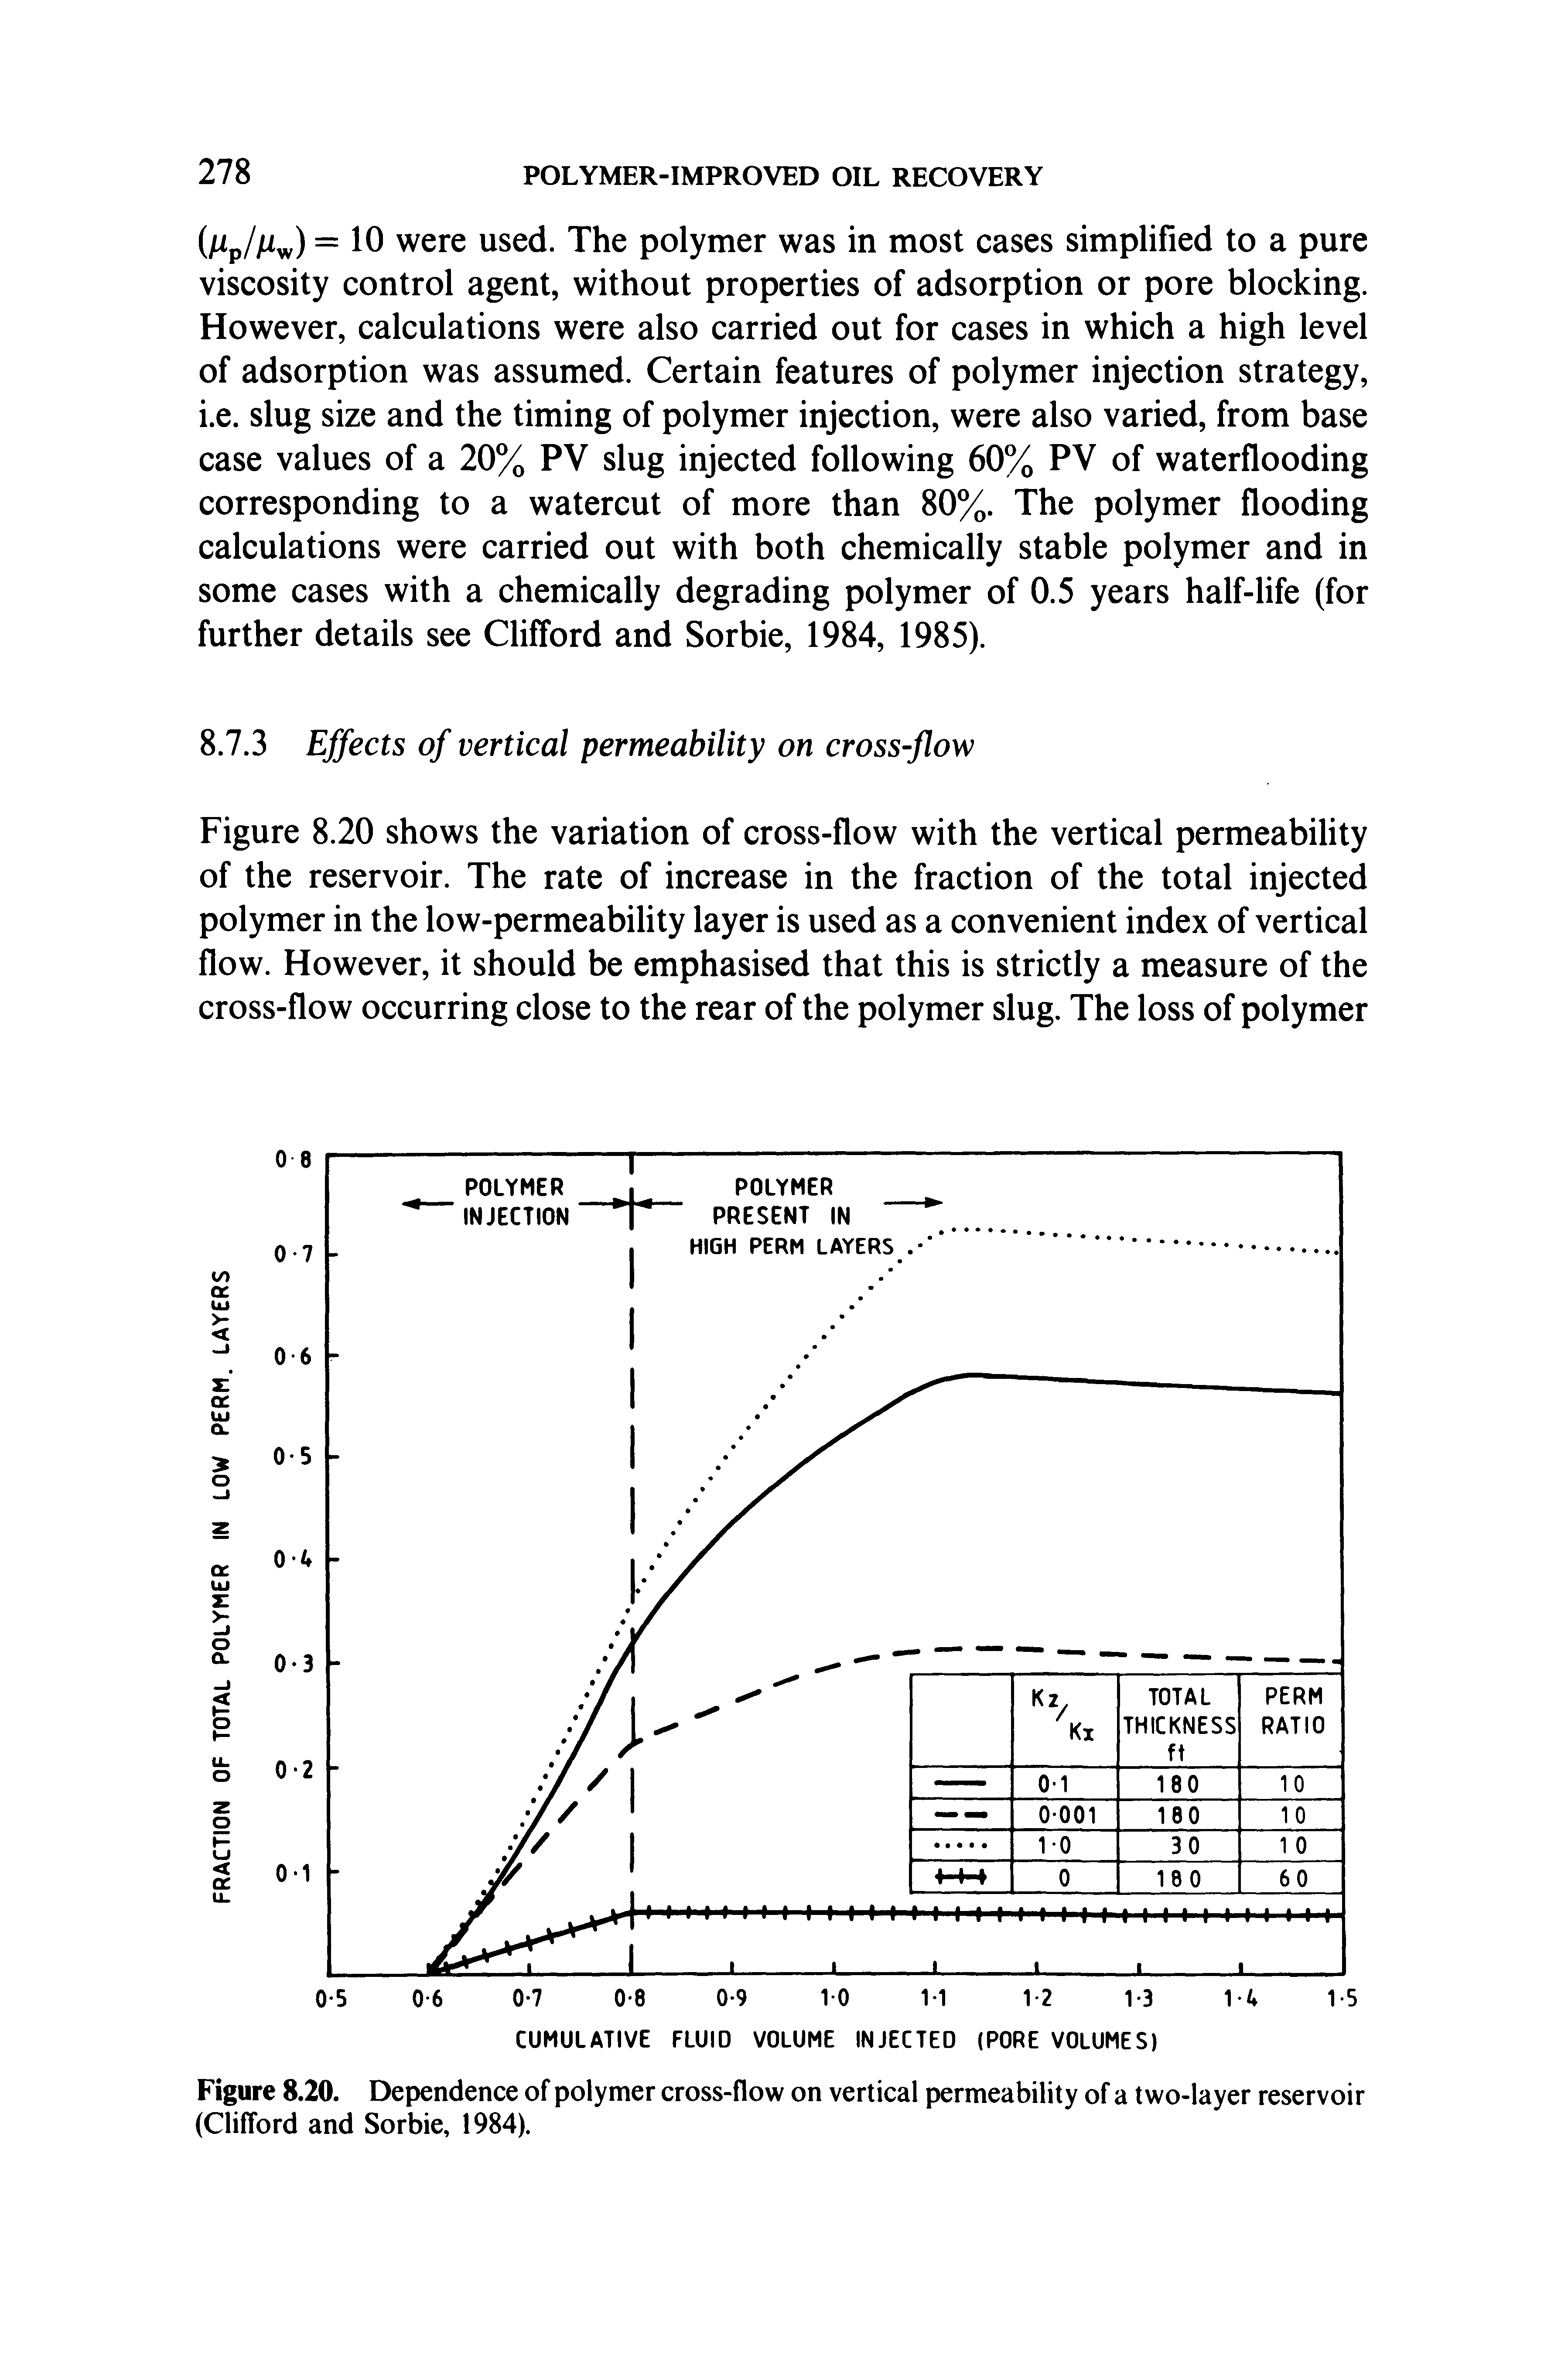 Figure 8.20. Dependence of polymer cross-flow on vertical permeability of a two-layer reservoir (Clifford and Sorbie, 1984).